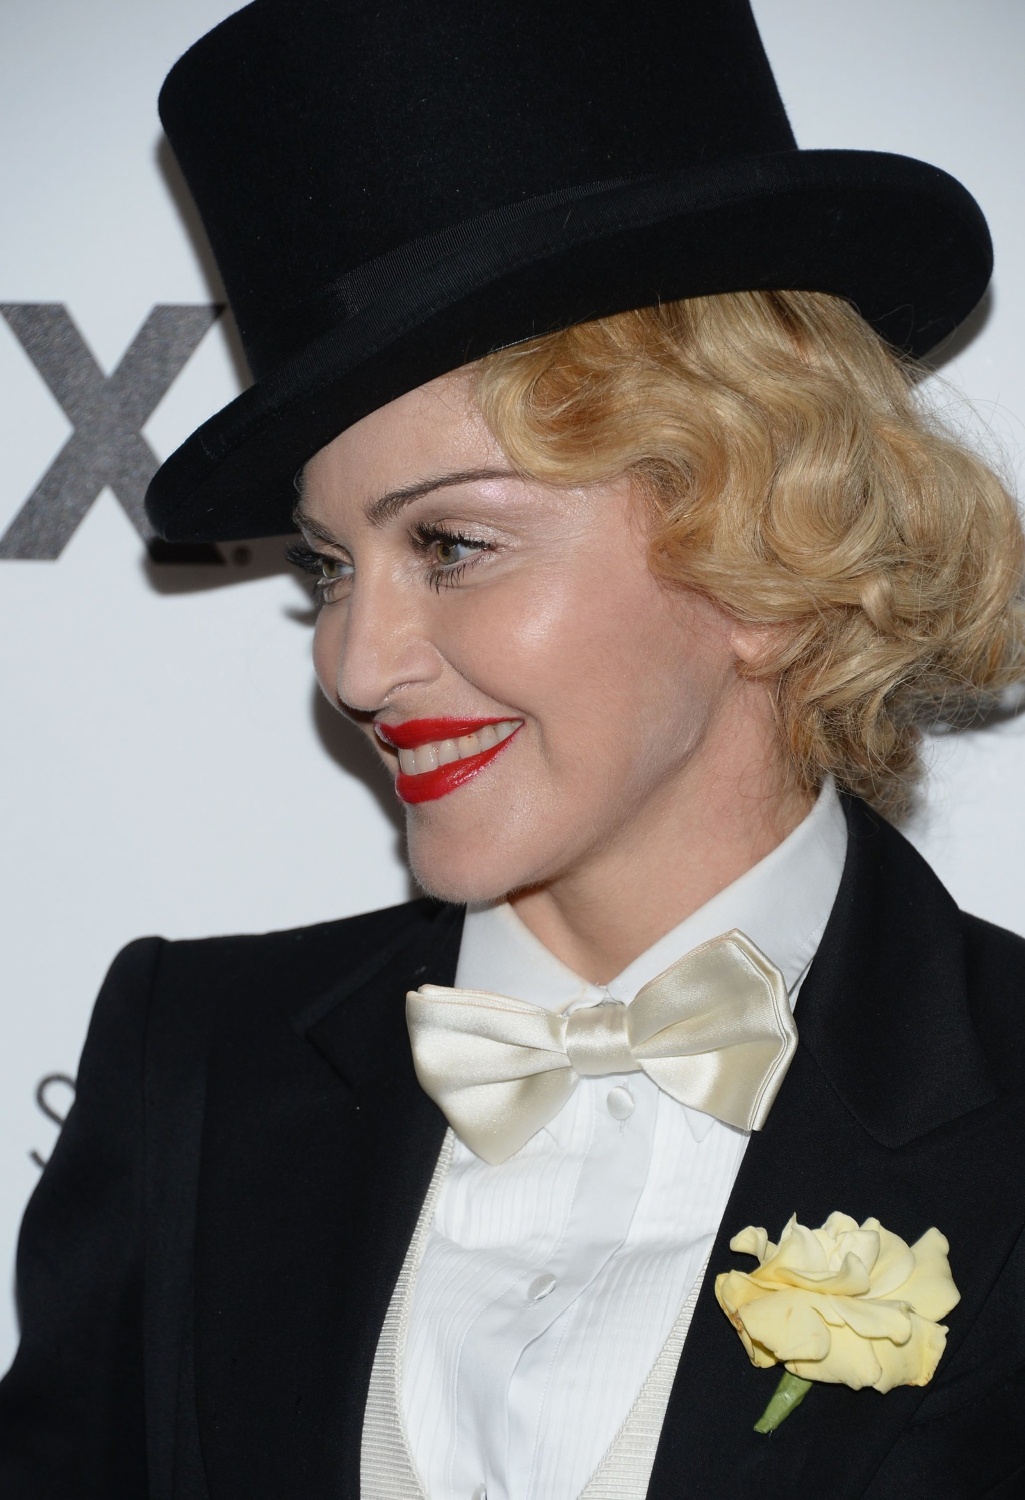 20130619-pictures-madonna-mdna-tour-premiere-screening-hq-07.jpg